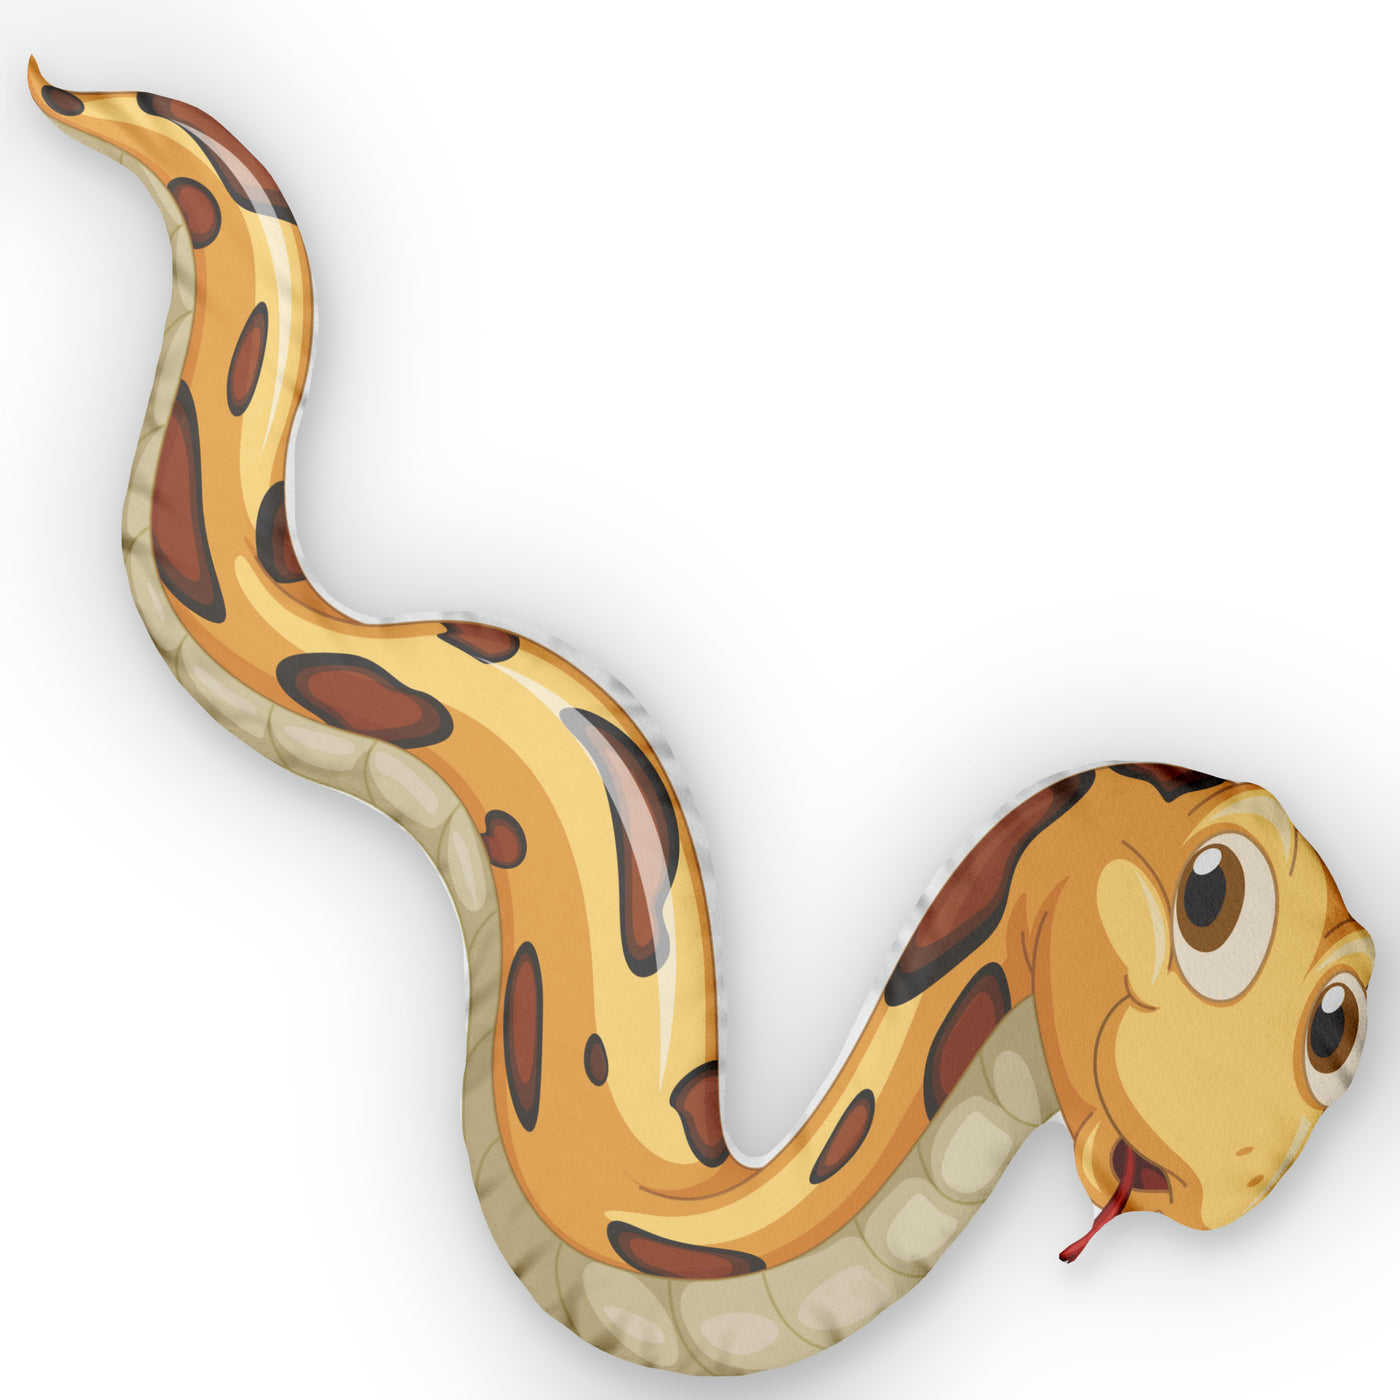 SSSENSATIONAL SNAKE Custom Shaped plush Pillows - Up to 32 inches